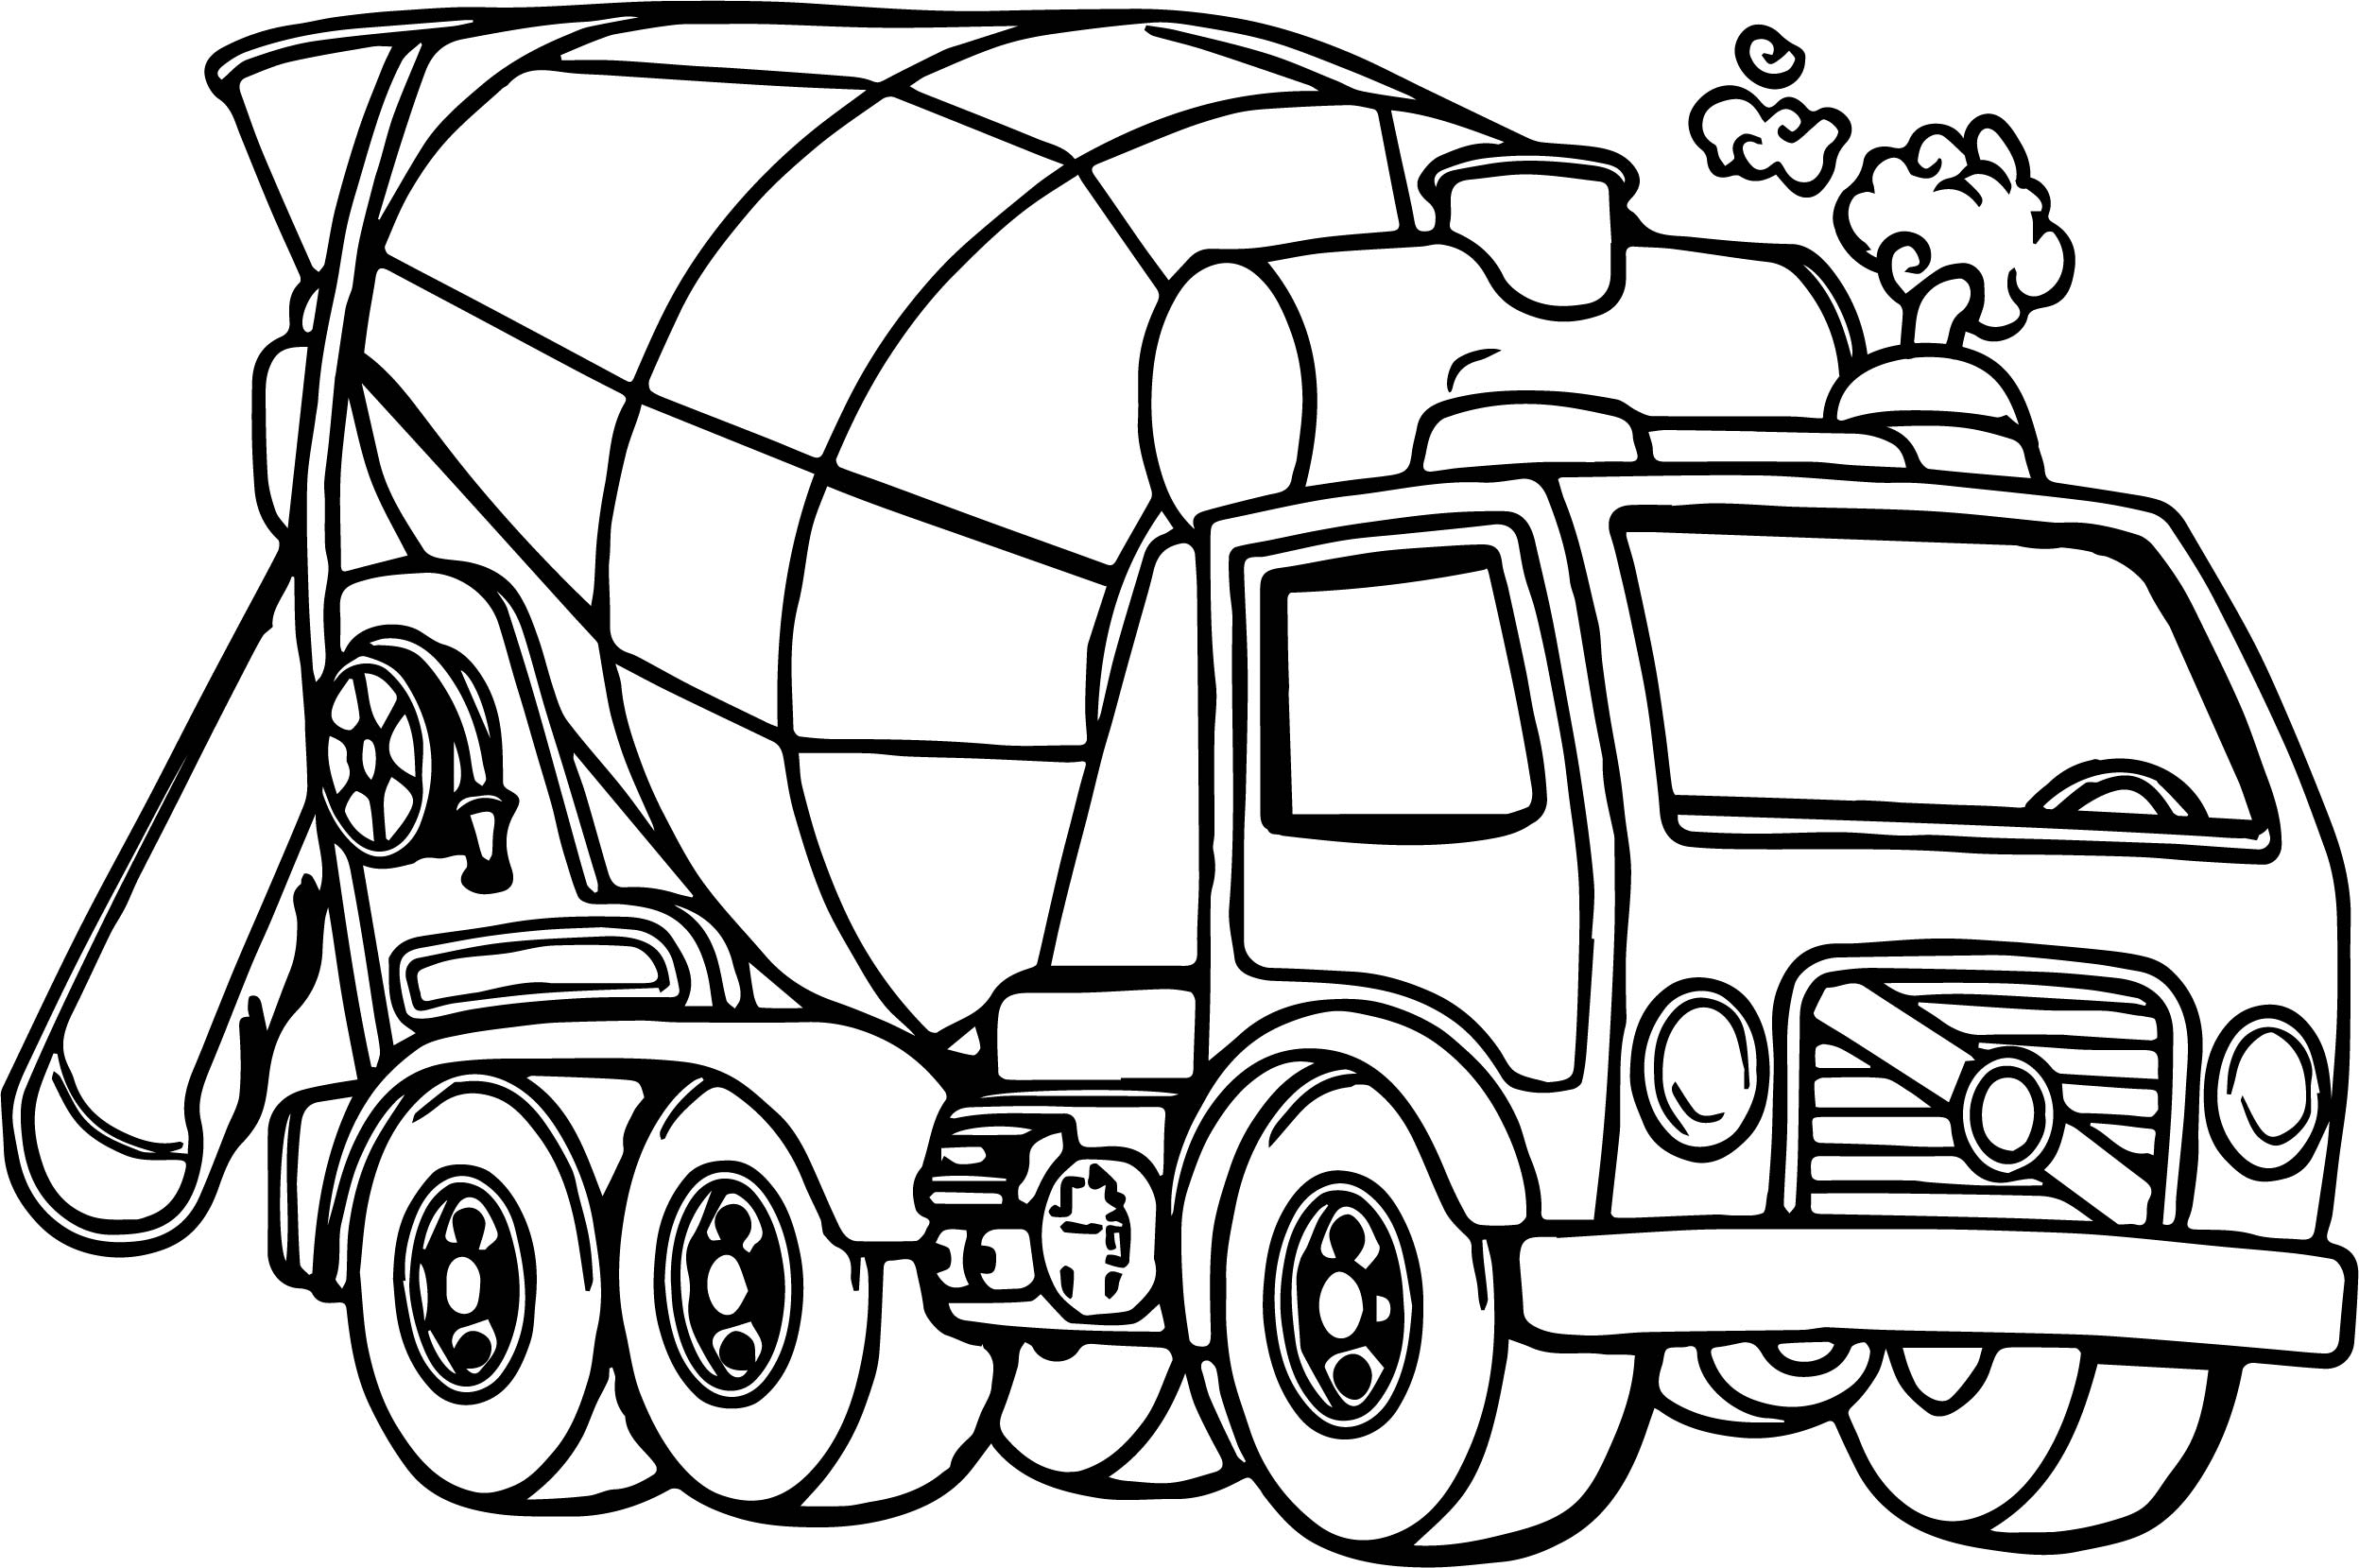 506 Unicorn Cement Mixer Coloring Page for Kindergarten